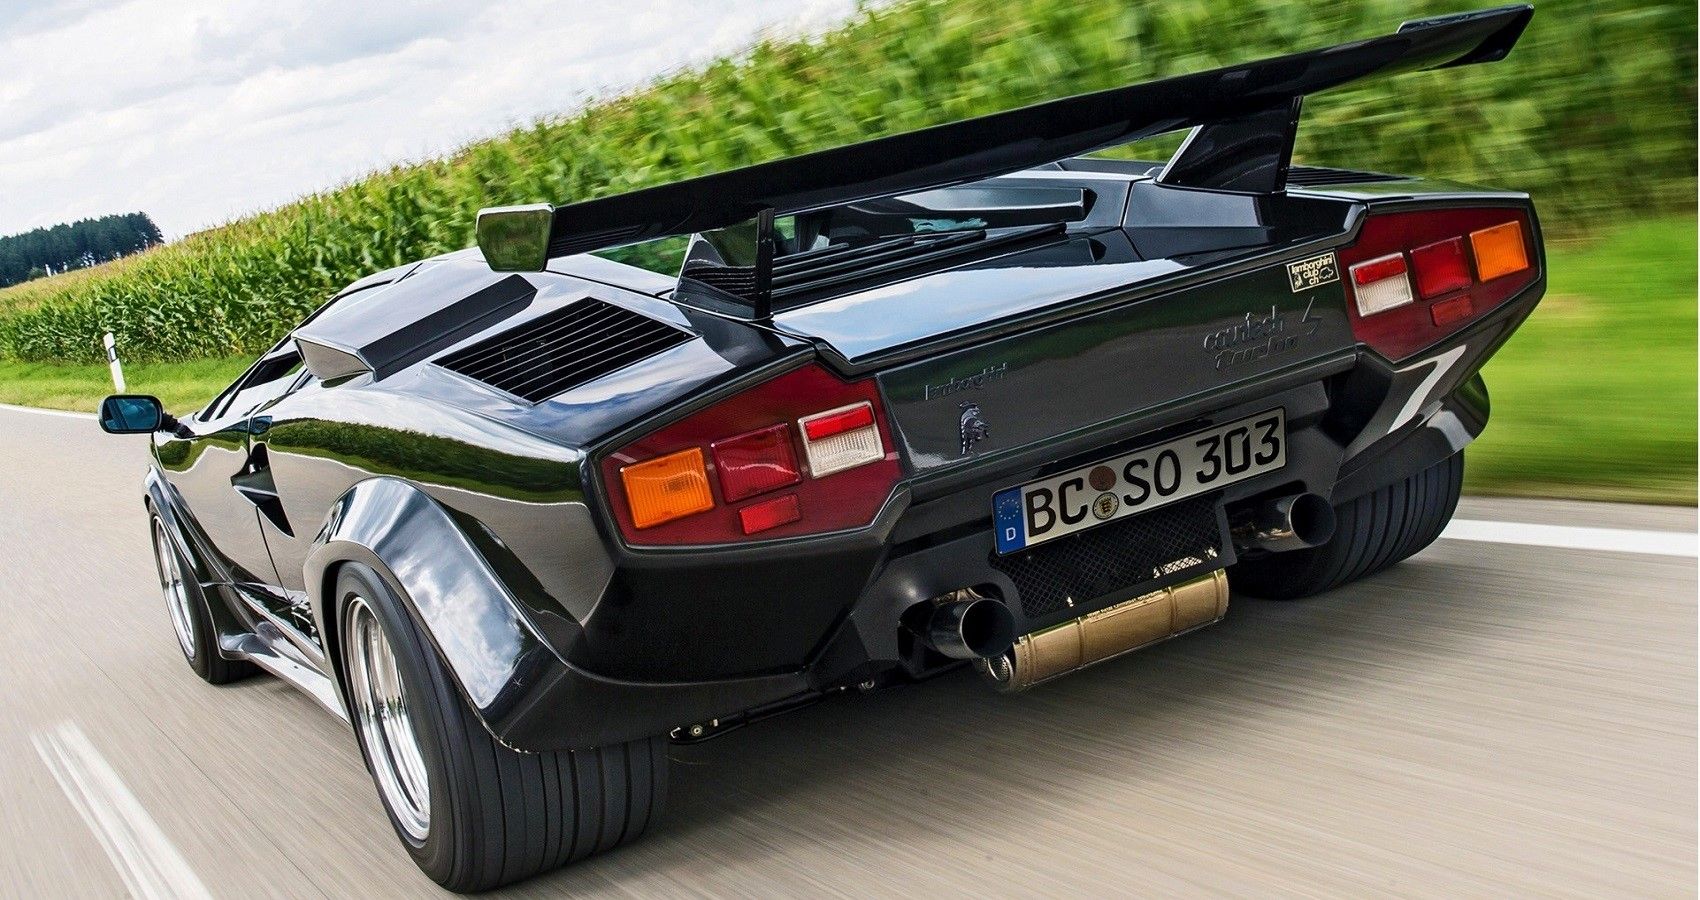 Countach Turbo S - Rear view